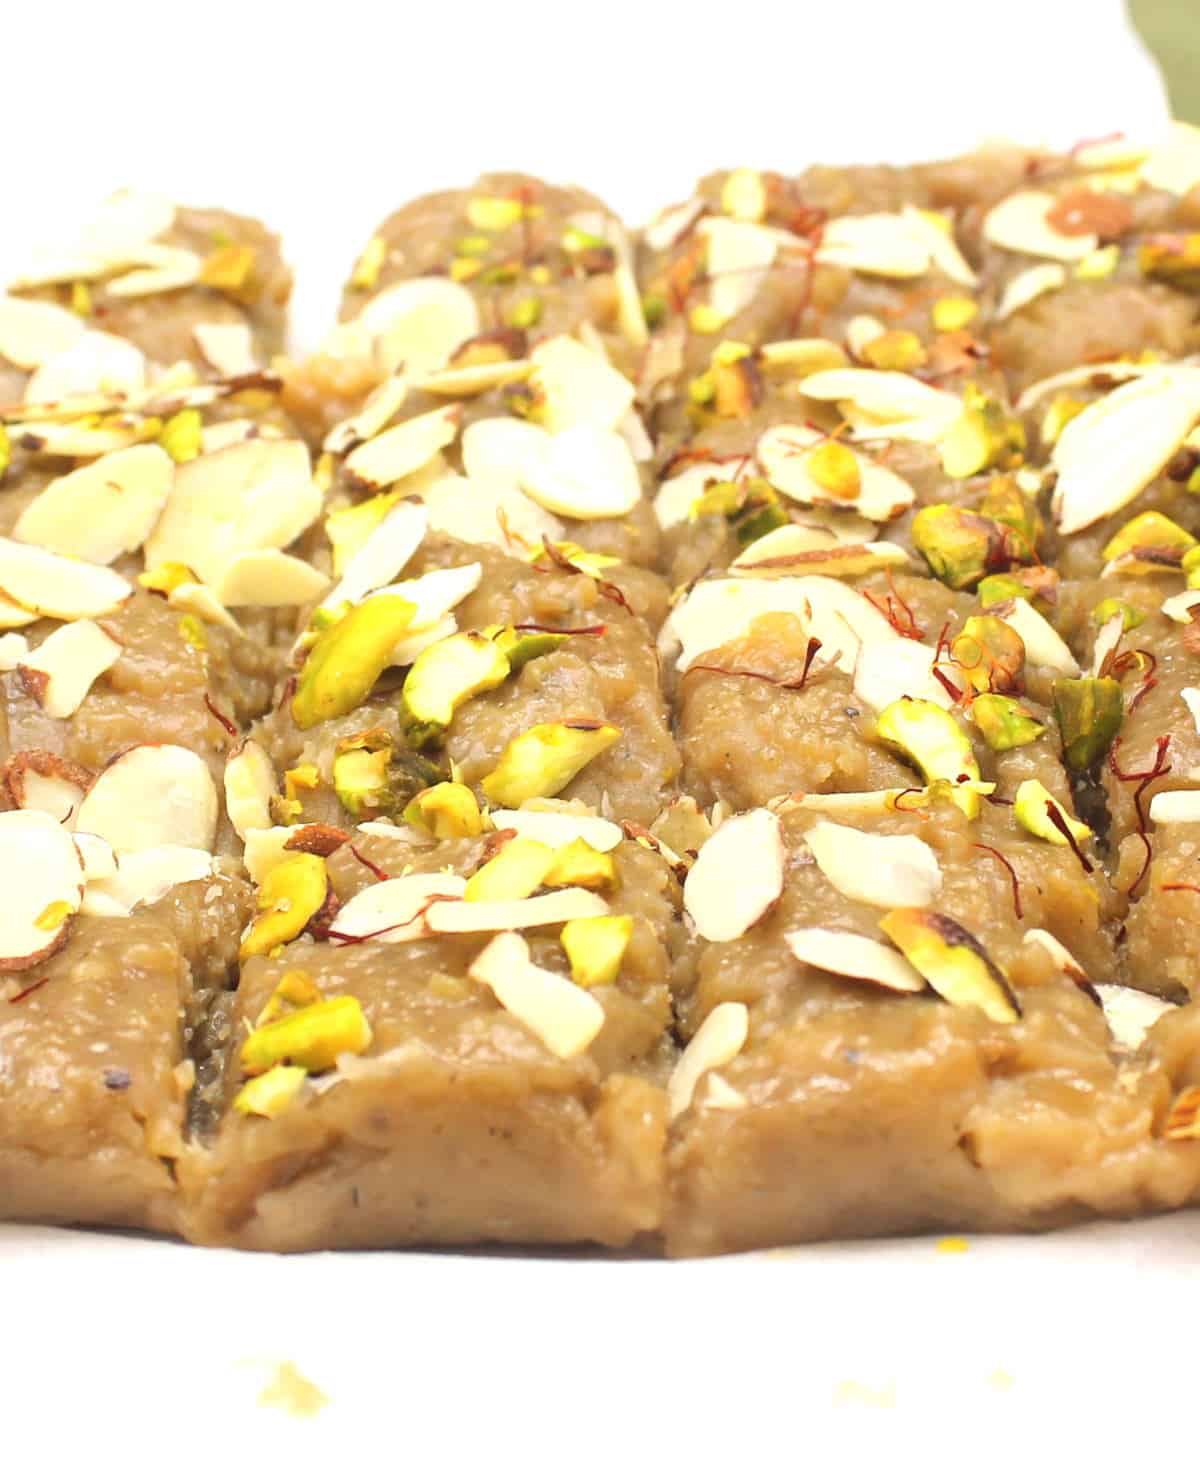 Vegan kalakand after cutting into slices on parchment paper.